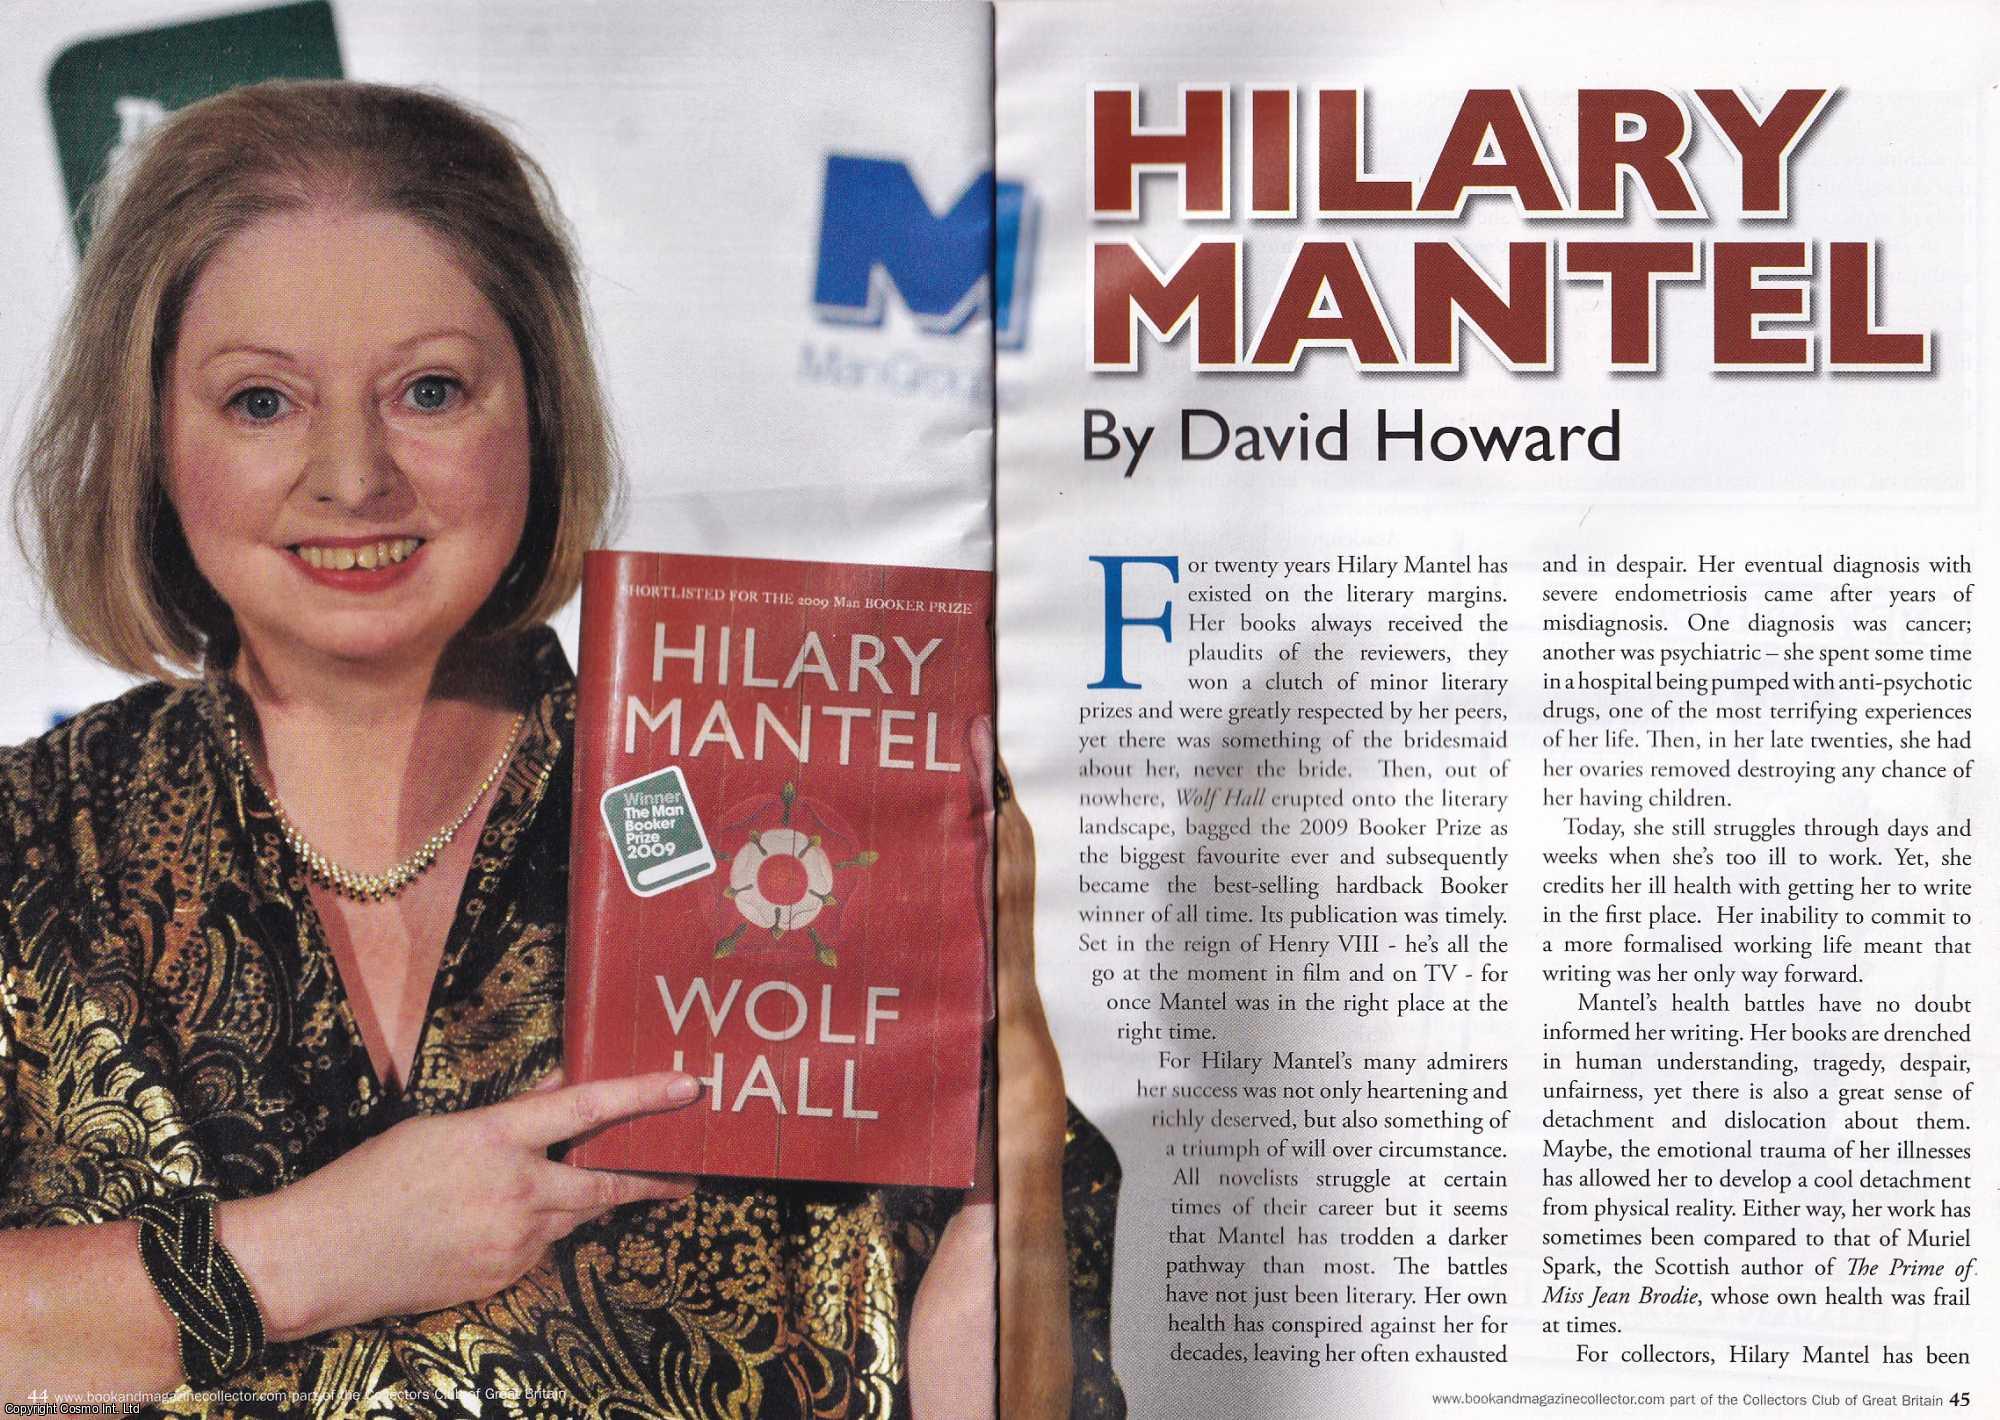 David Howard - Hilary Mantel, writer. This is an original article separated from an issue of The Book & Magazine Collector publication, 2010.